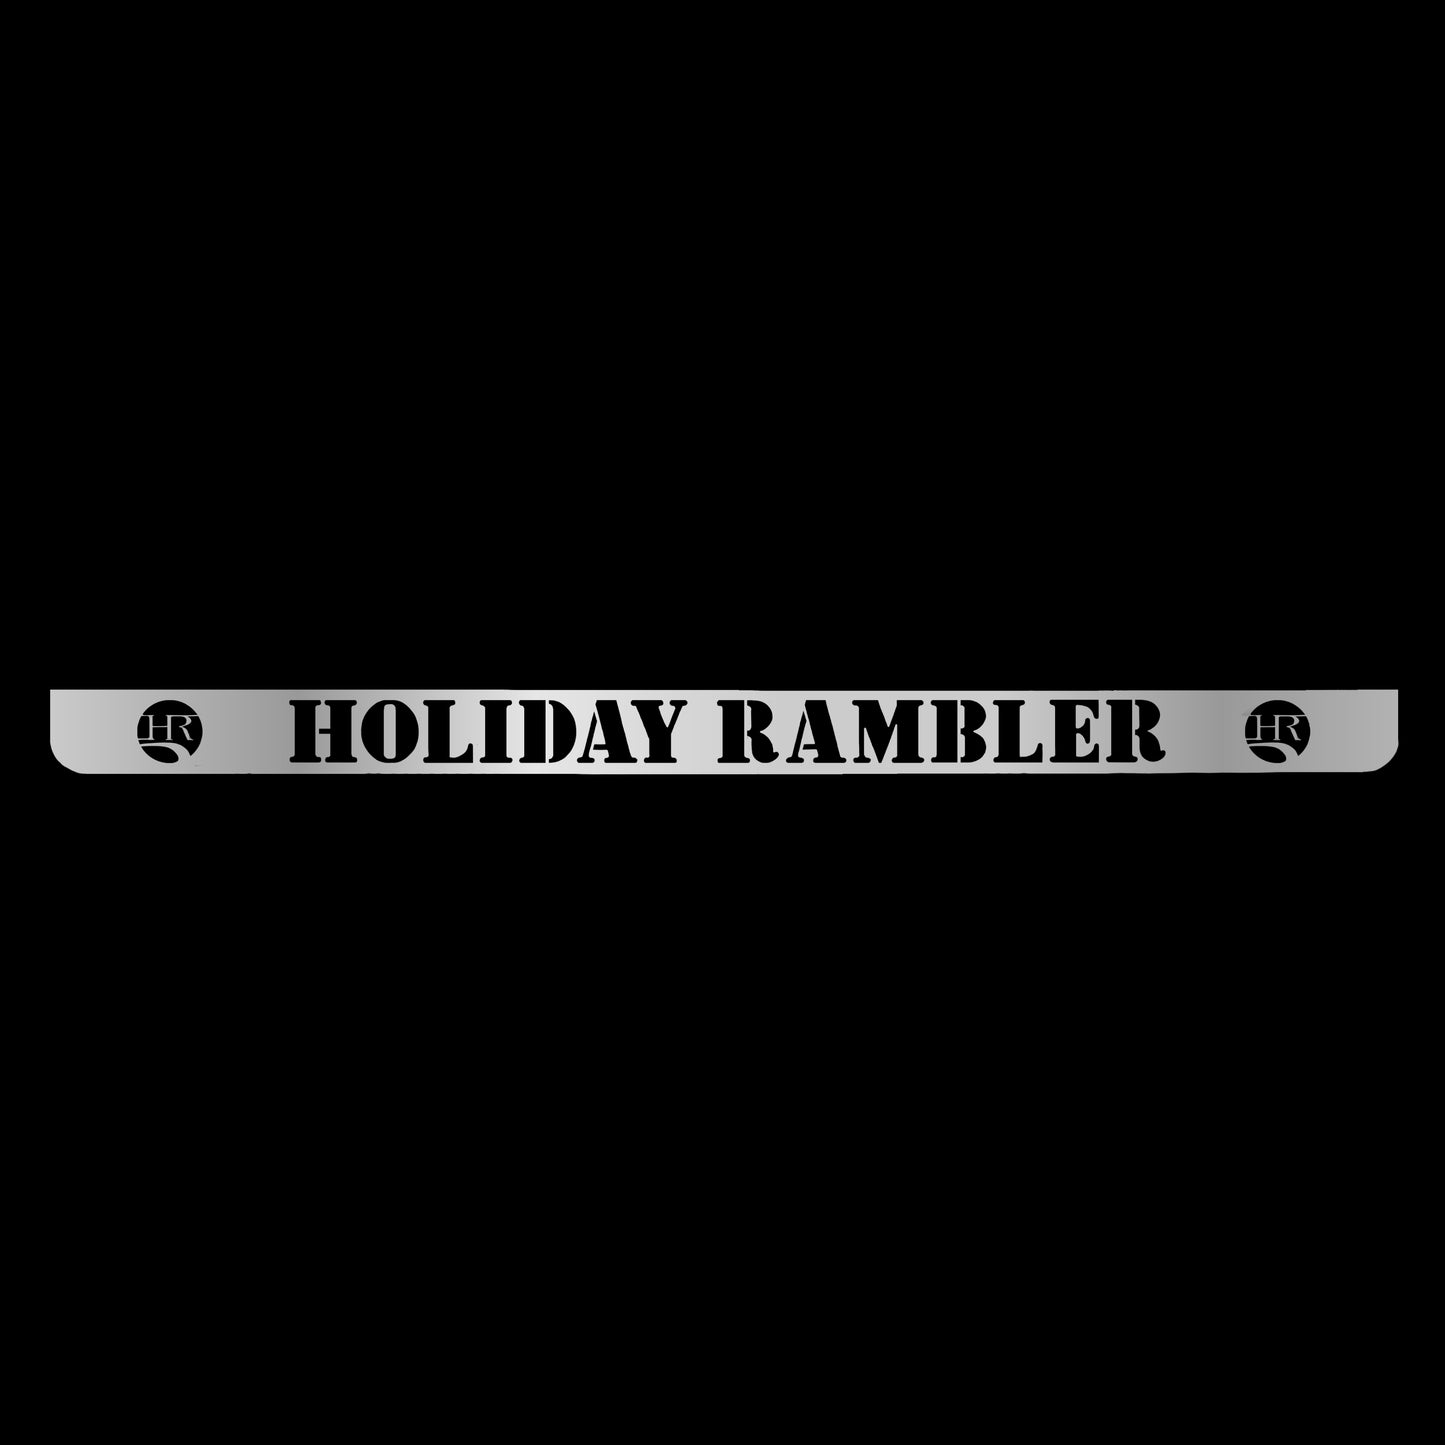 Future-Sales-Holiday-Rambler-Face-Plate-stainless-steel-mirror-finish-Height-6-Width-94-backer-plate-SSHR-01S